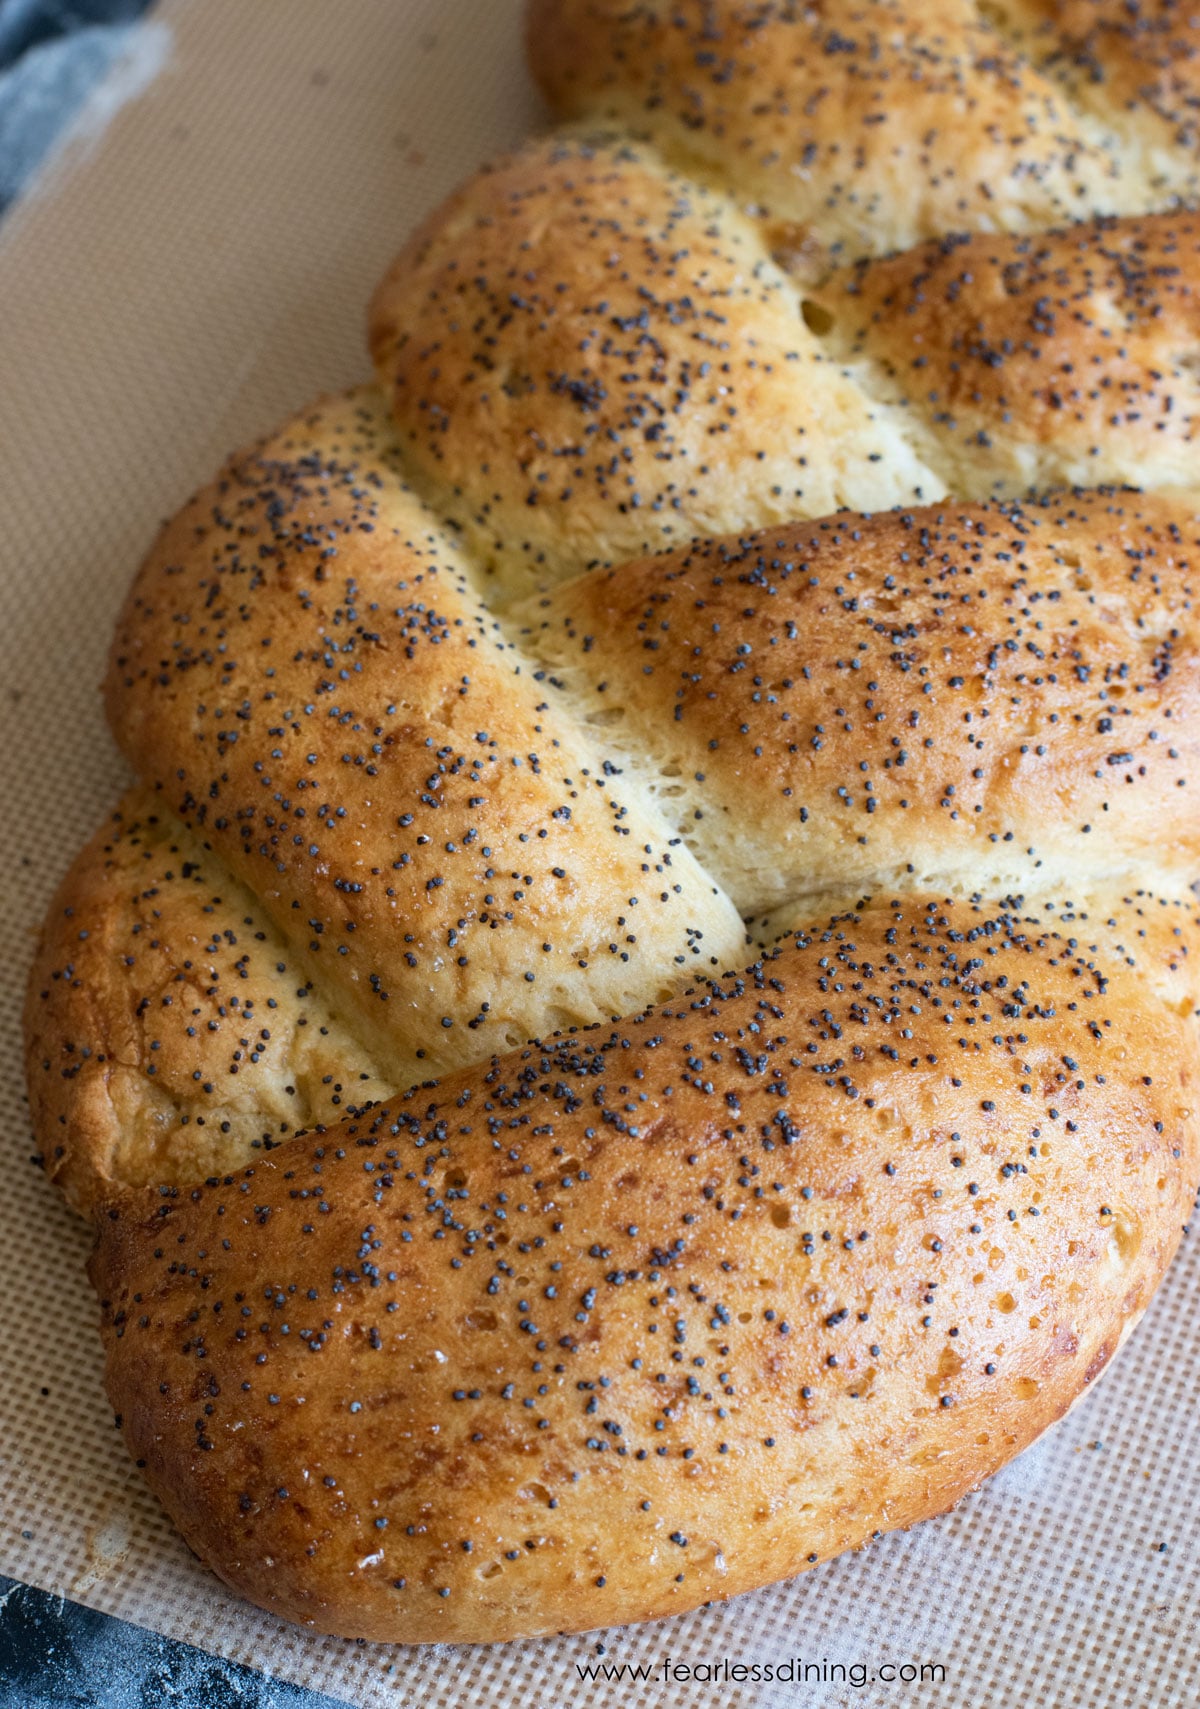 A close up of the baked challah braids.